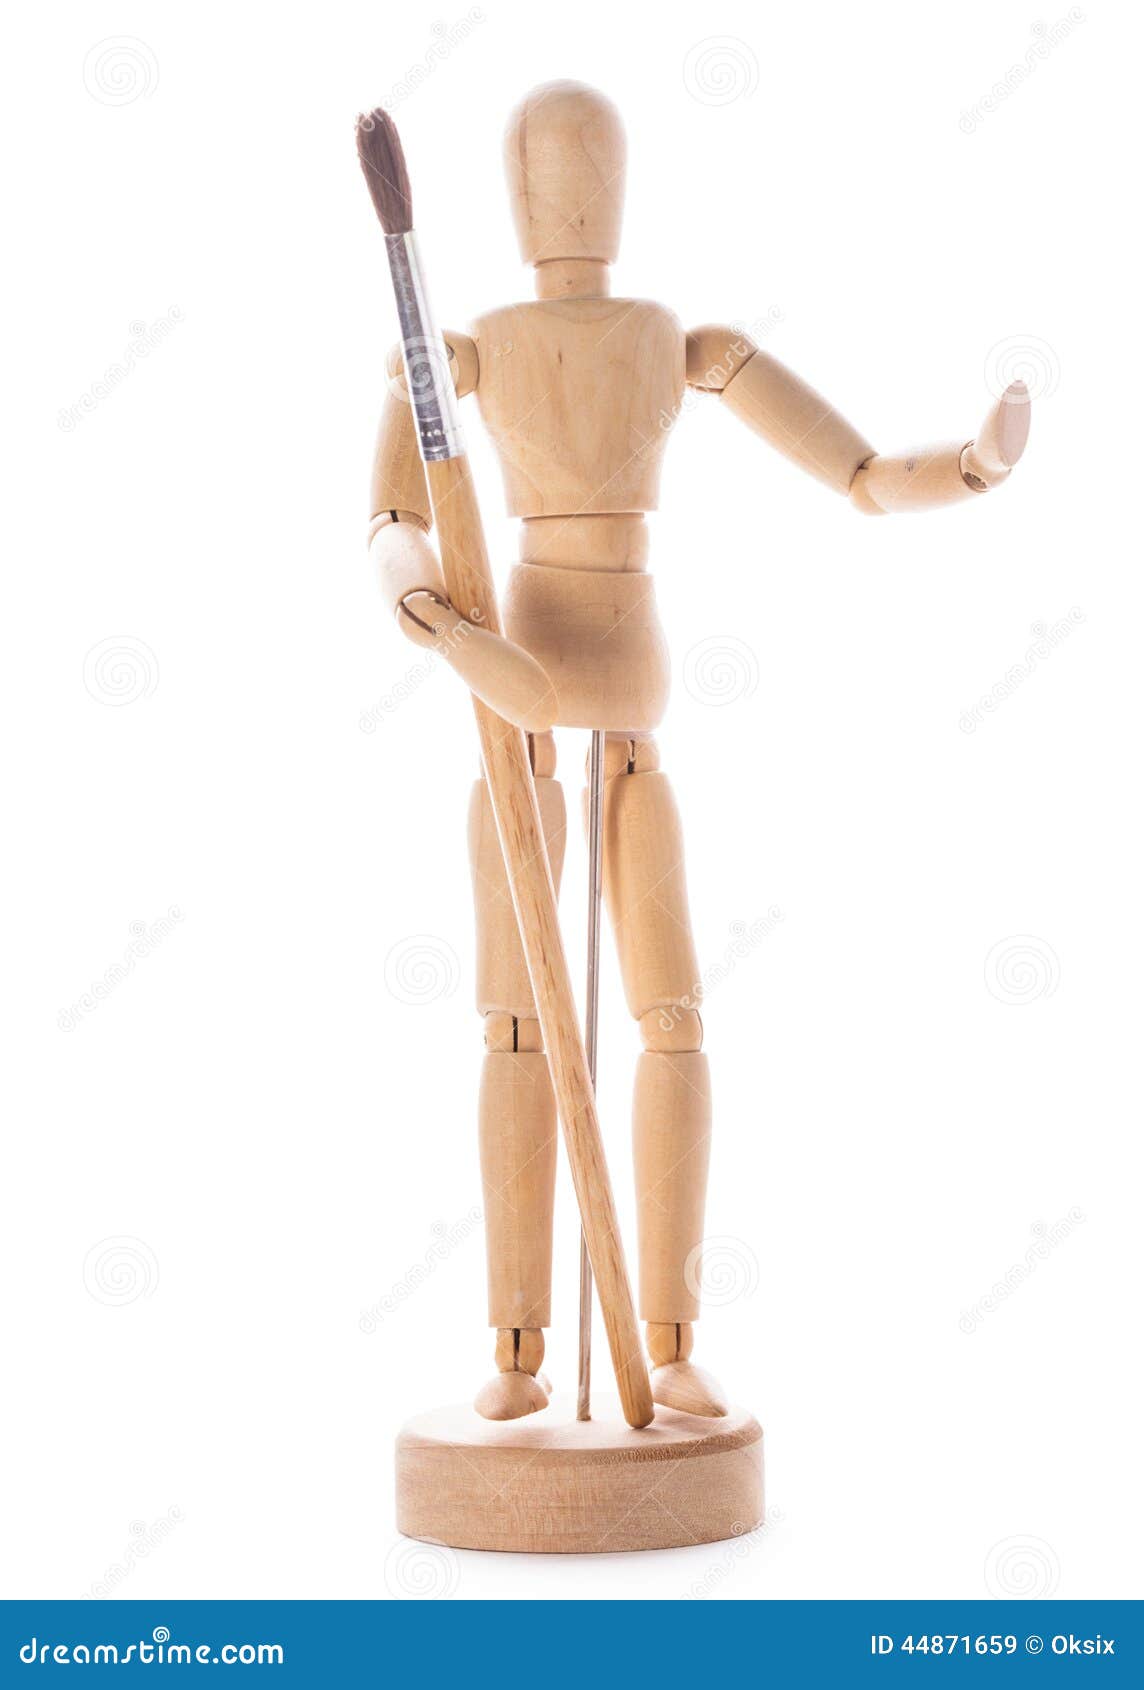 Vertical Shot Wooden Pose Doll One Hand Its Head Other Stock Photo by  ©Wirestock 317355488